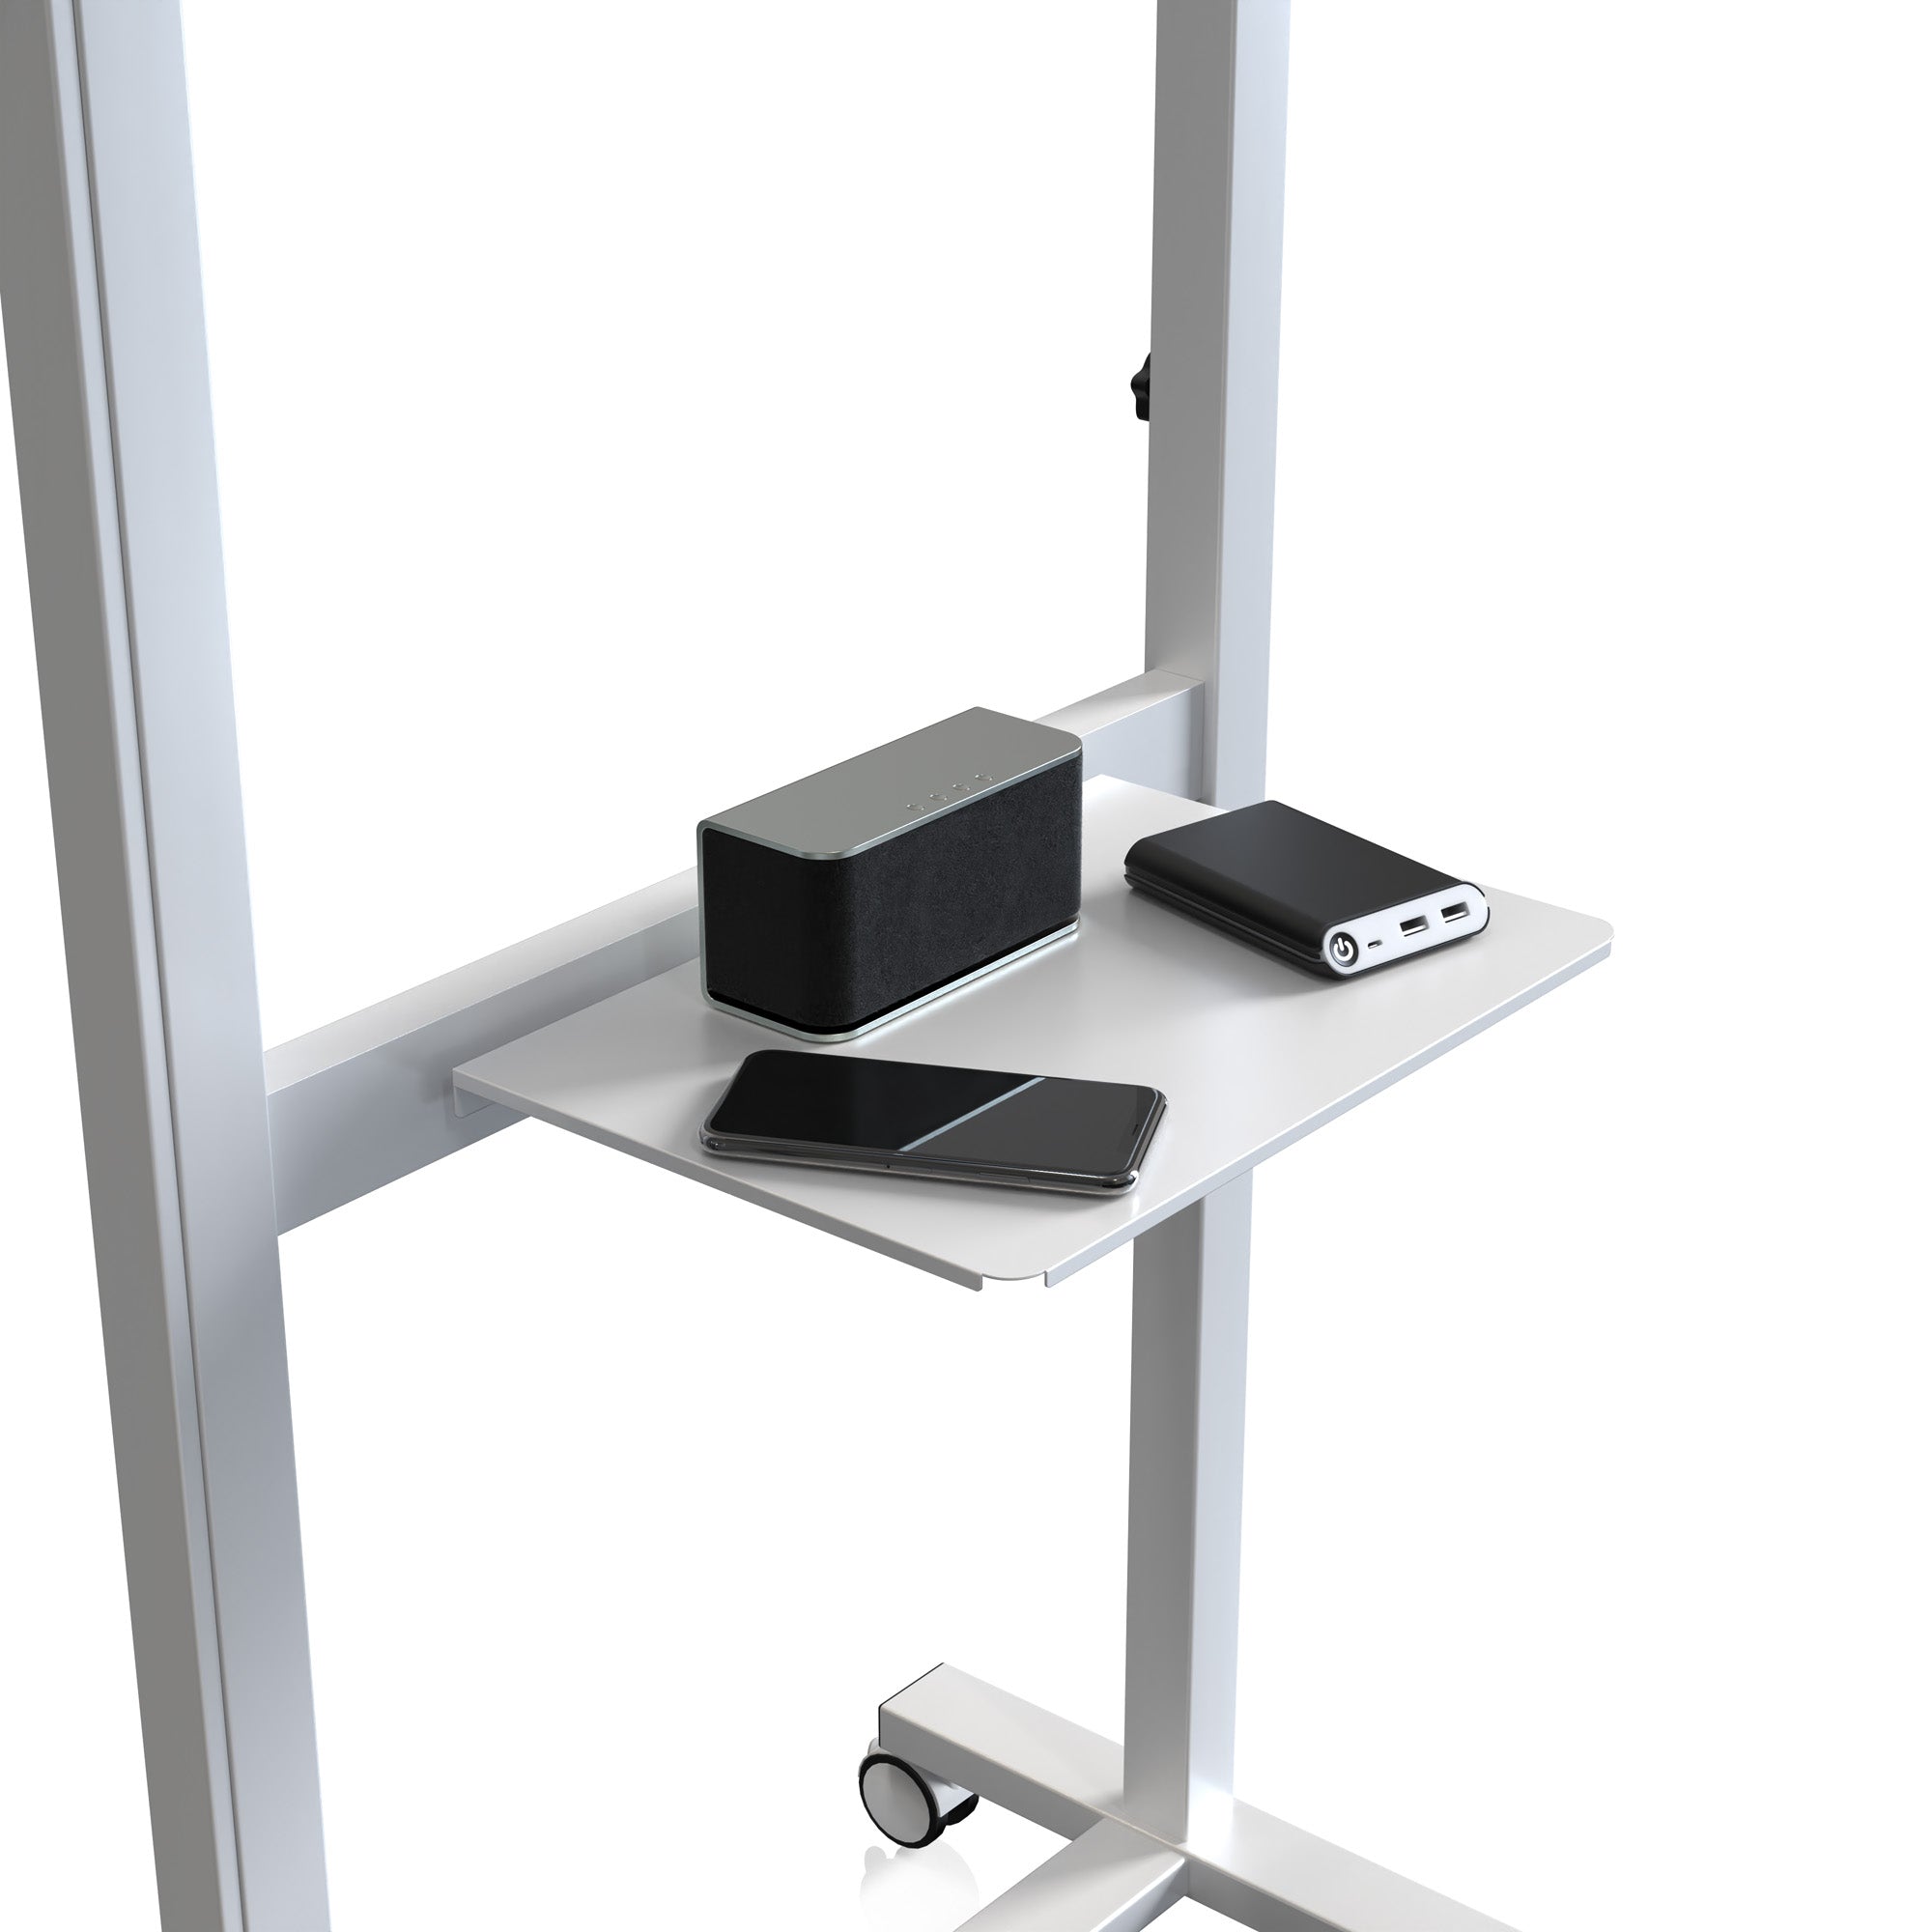 Rolling Display Mount with Cable Management